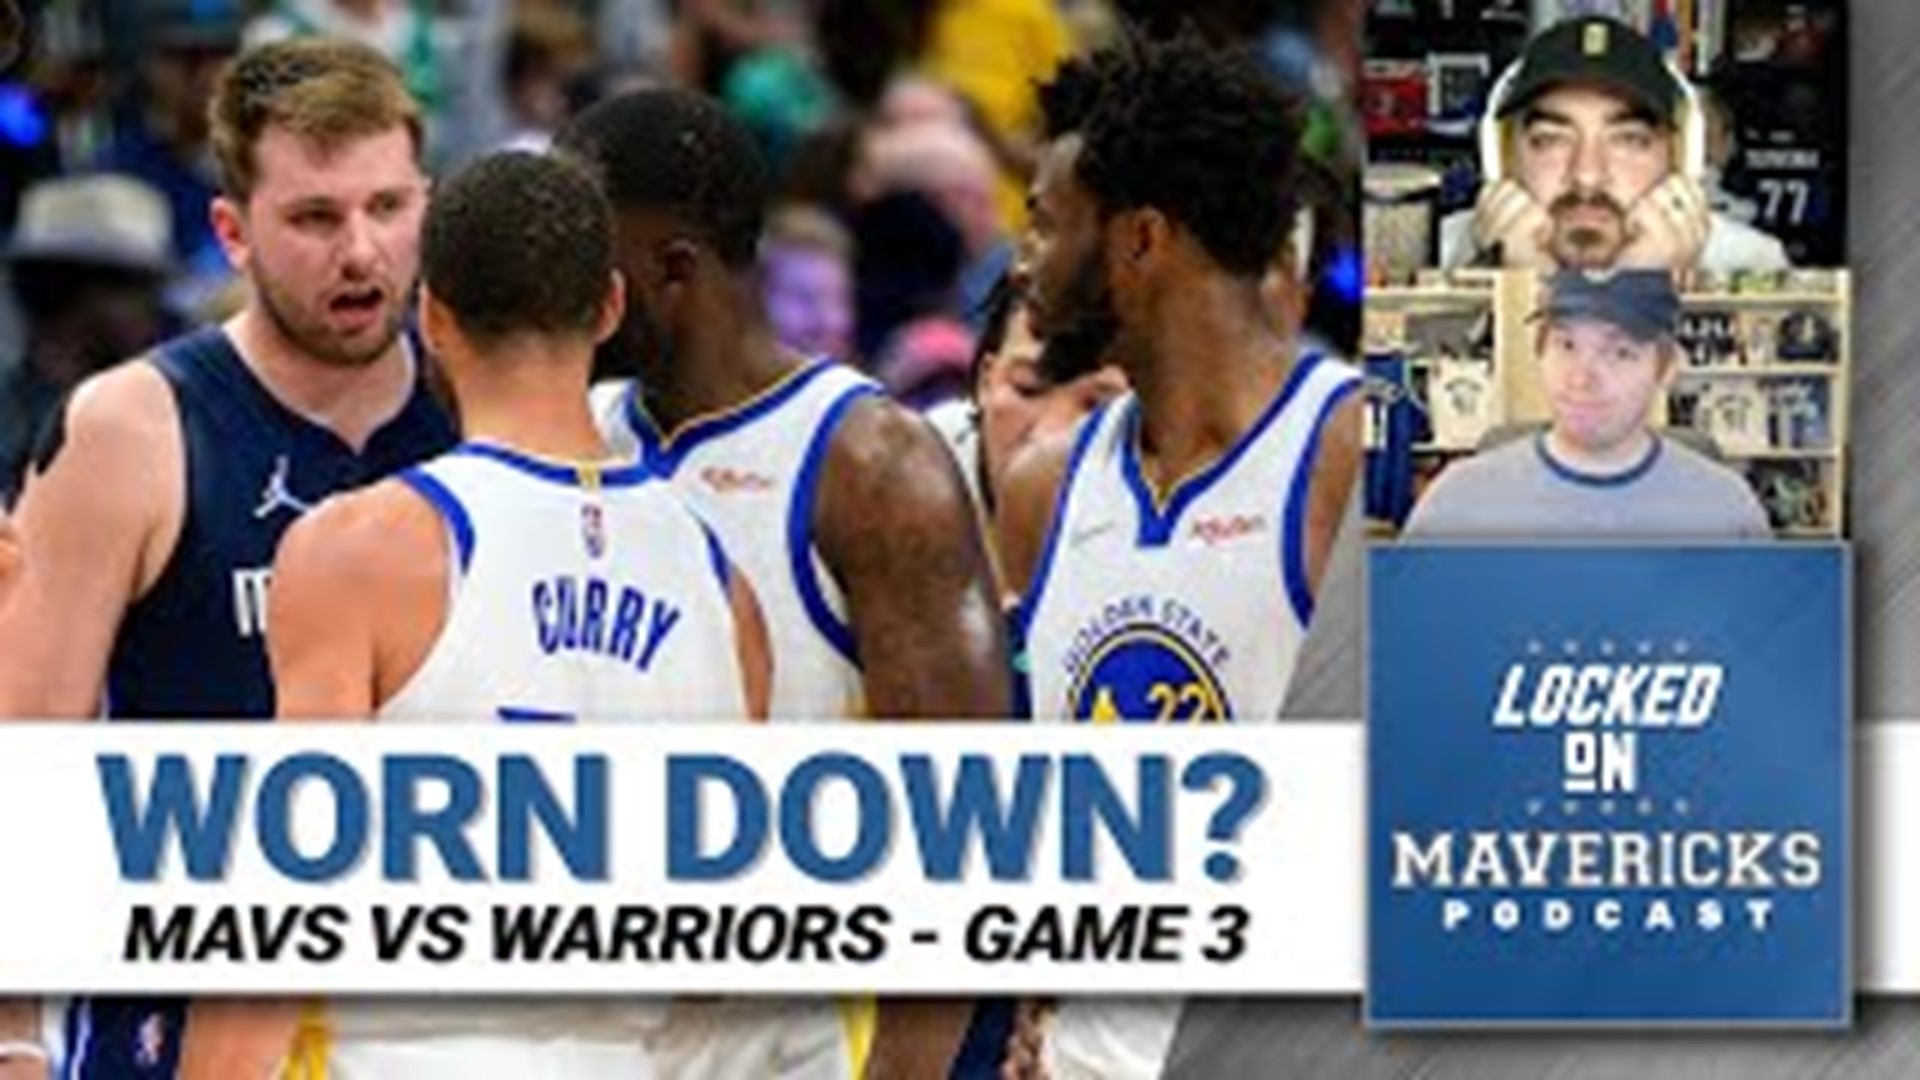 Nick Angstadt and Isaac Harris break down Game 3 of the Western Conference Finals series. What went wrong for the Mavs in this game?